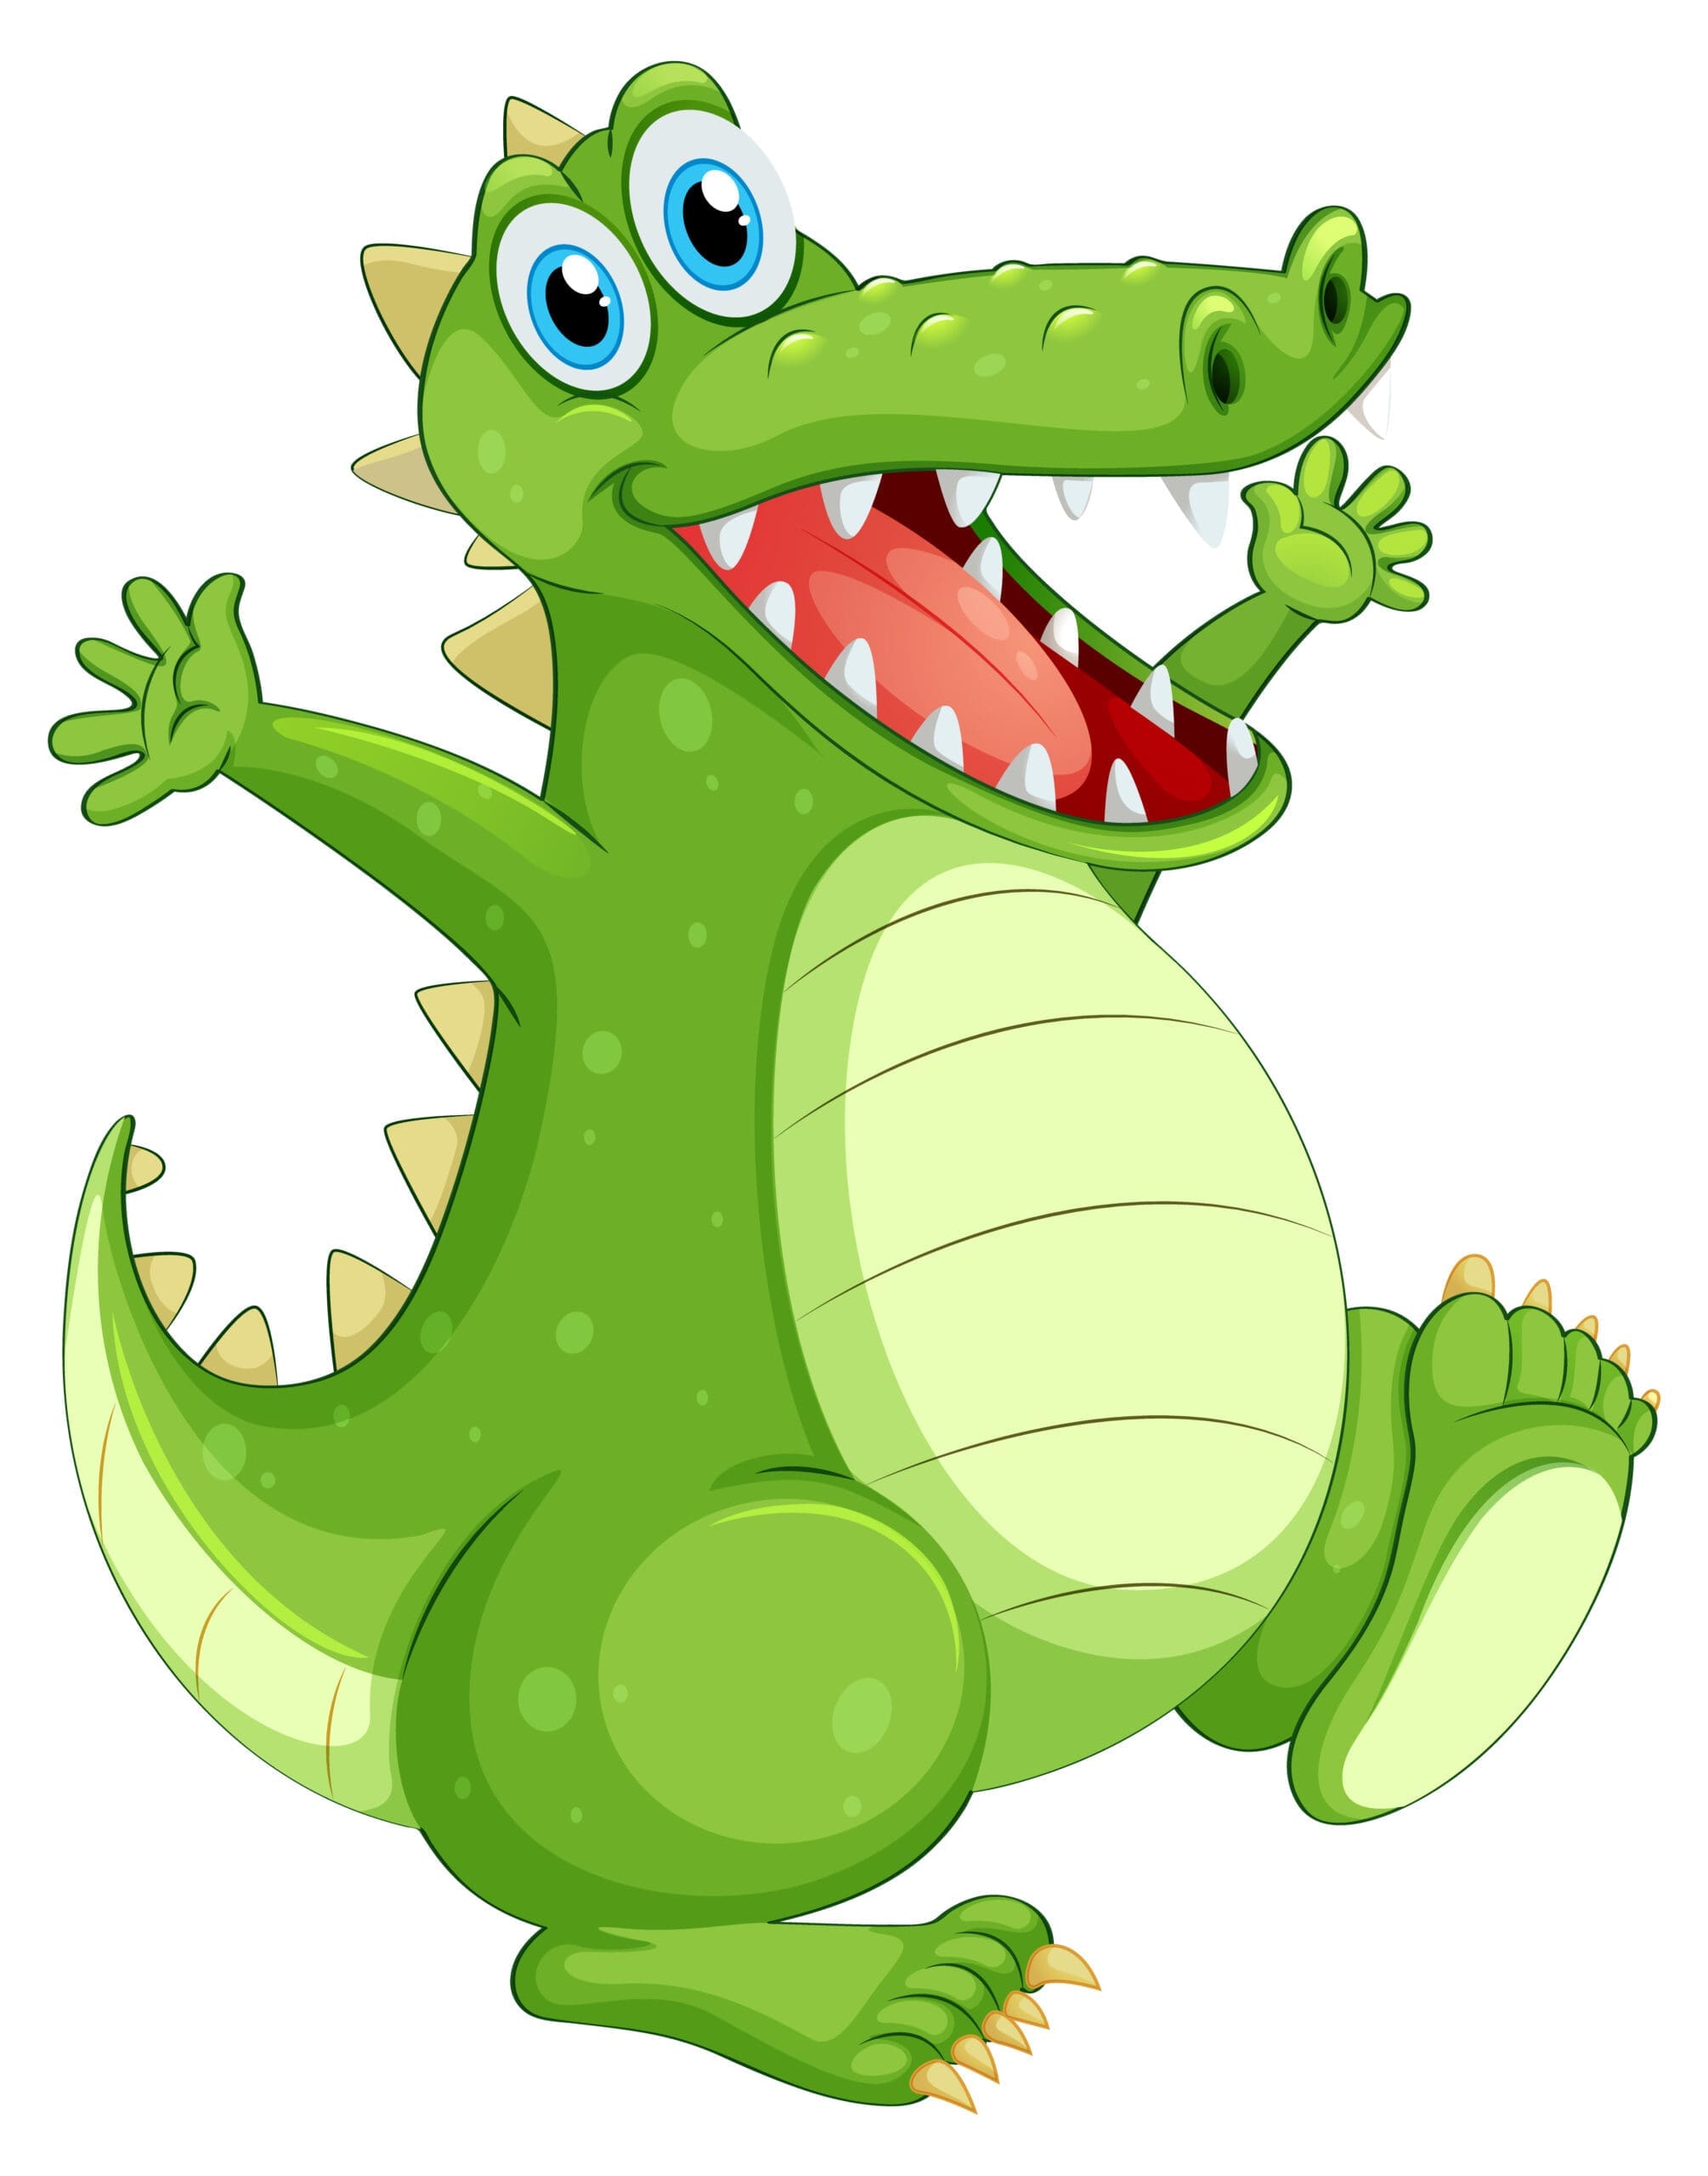 Cartoon graphic of an alligator in a vest giving fashion tips.